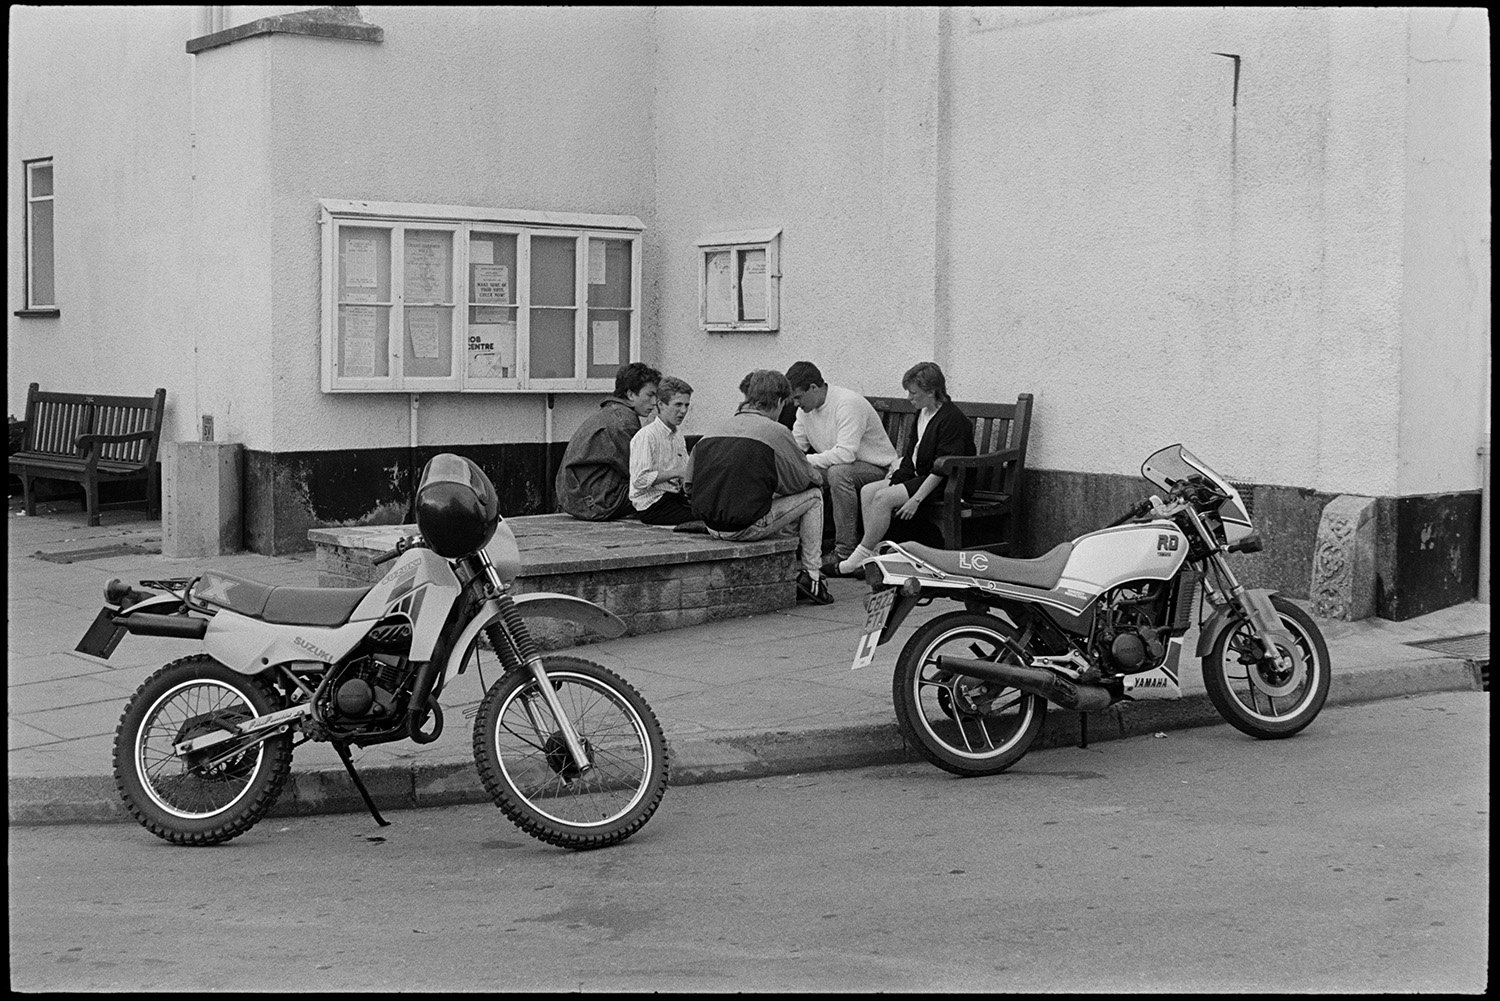 Street scenes with people and cars. 
[A group of young people sitting on a bench and wall in a street by The Red Lion Hotel in Chulmleigh. Two motorbikes are parked on the road in the foreground.]